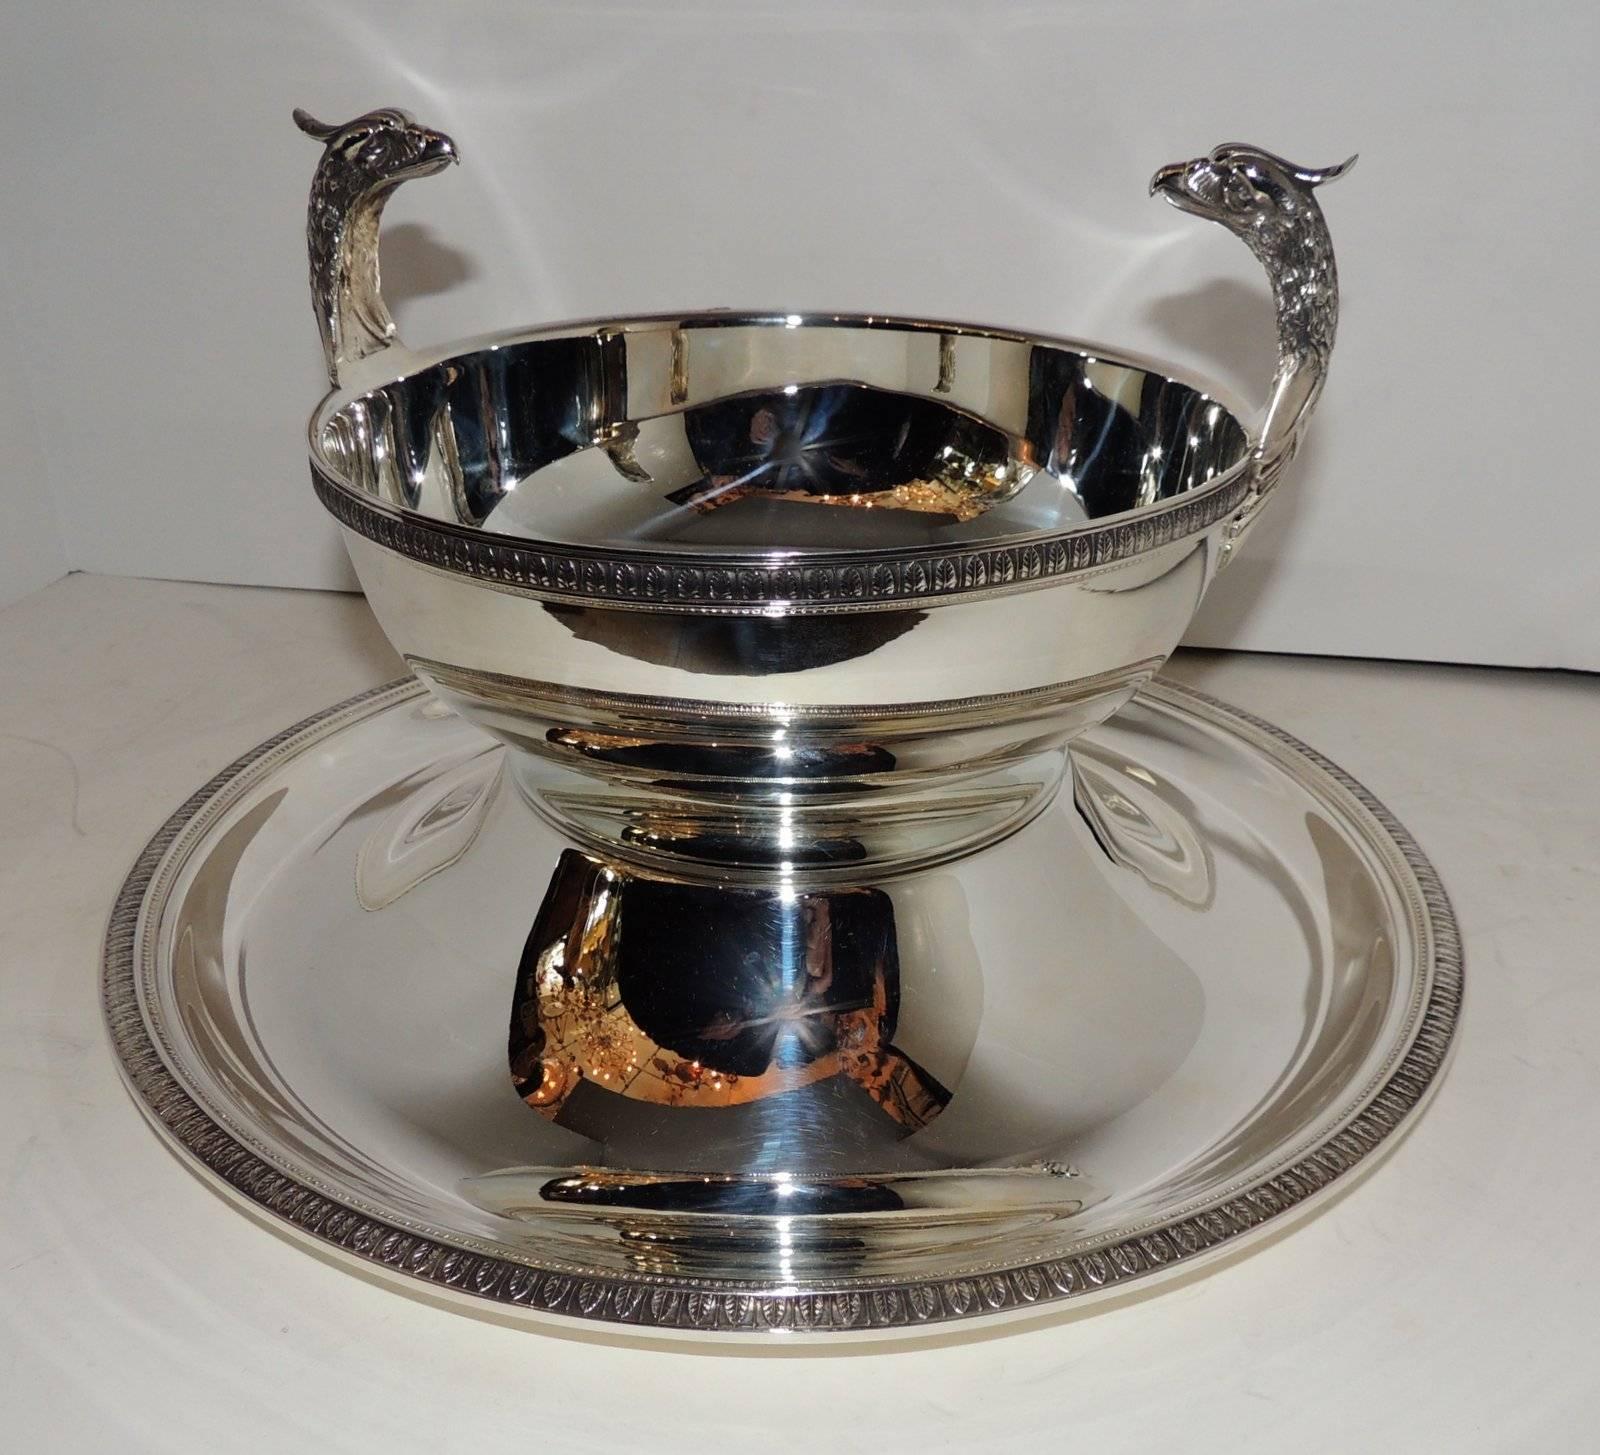 A rare and wonderful Christofle Malmaison two-piece pedestal silver plate centerpiece. The pattern Malmaison is in the Regency Empire style, with it's frieze of delicate palm and lotus leaves and symmetrical design finished with swan handle